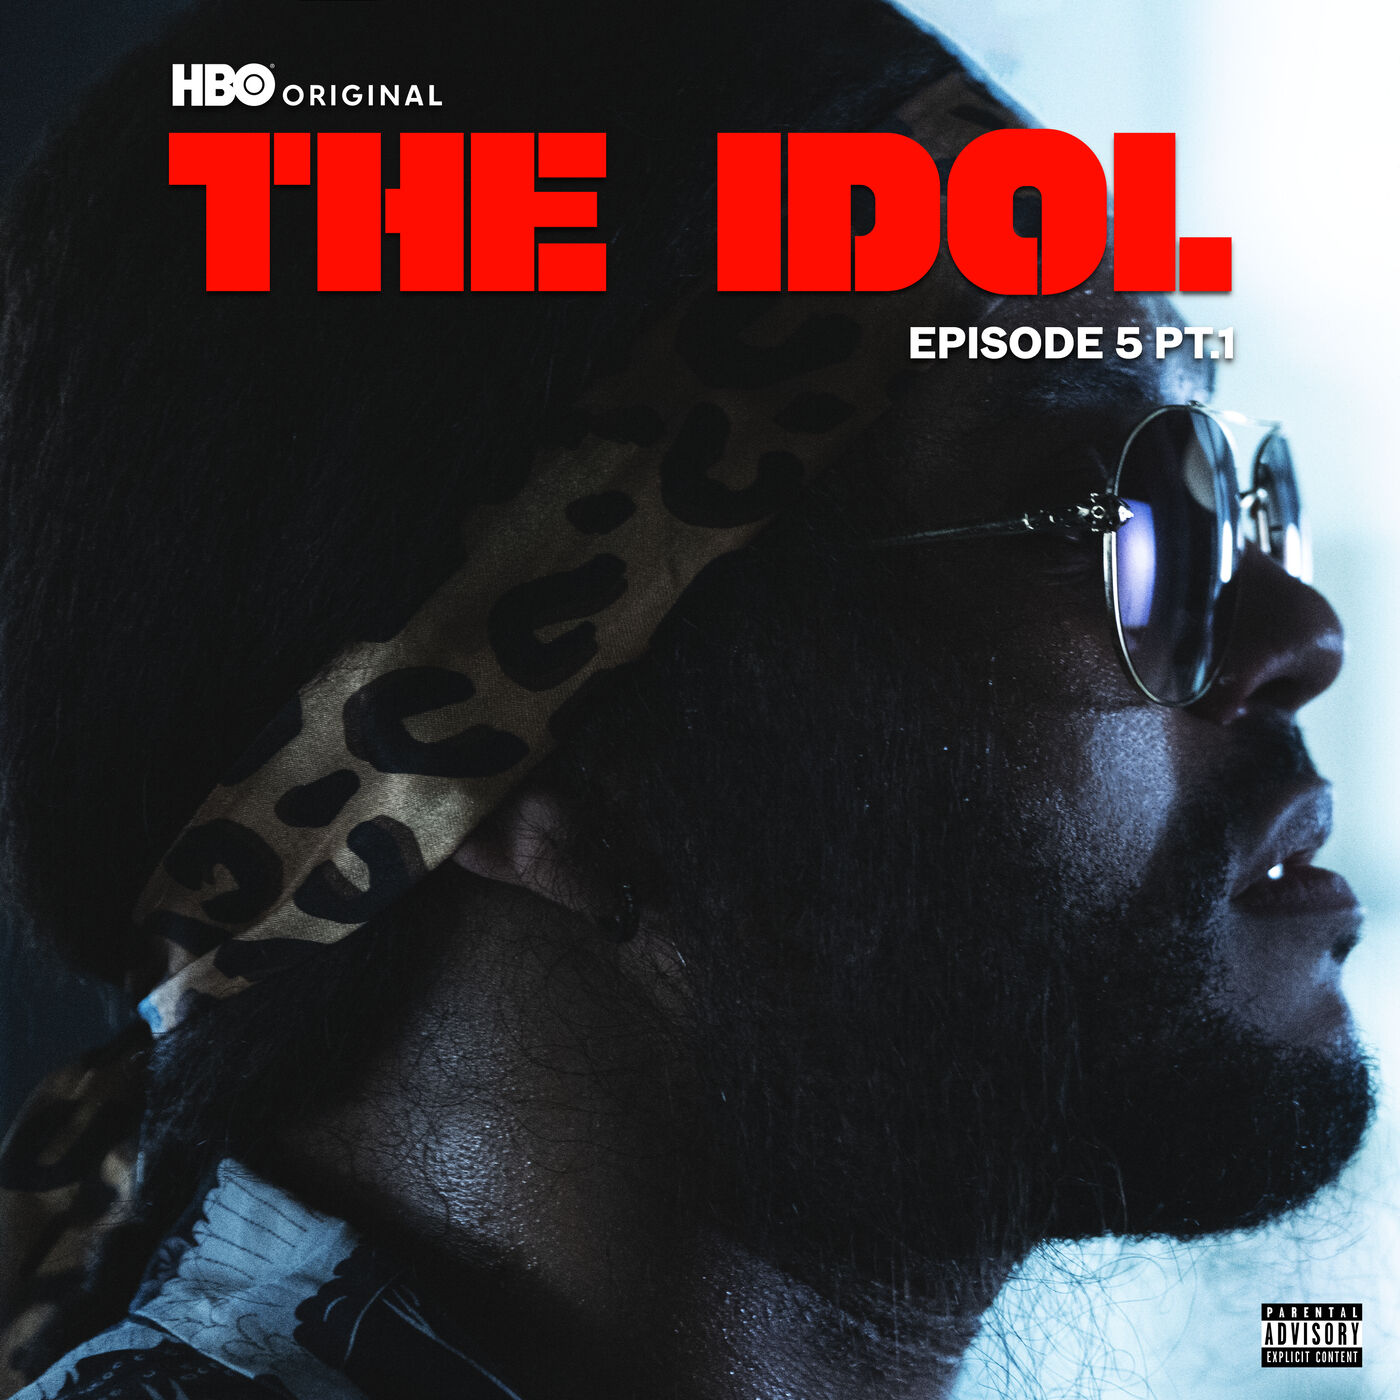 The Weeknd – The Idol Episode 5 Part 1 (Music from the HBO Original Series)Ⓔ【44.1kHz／16bit】美国区-OppsUpro音乐帝国